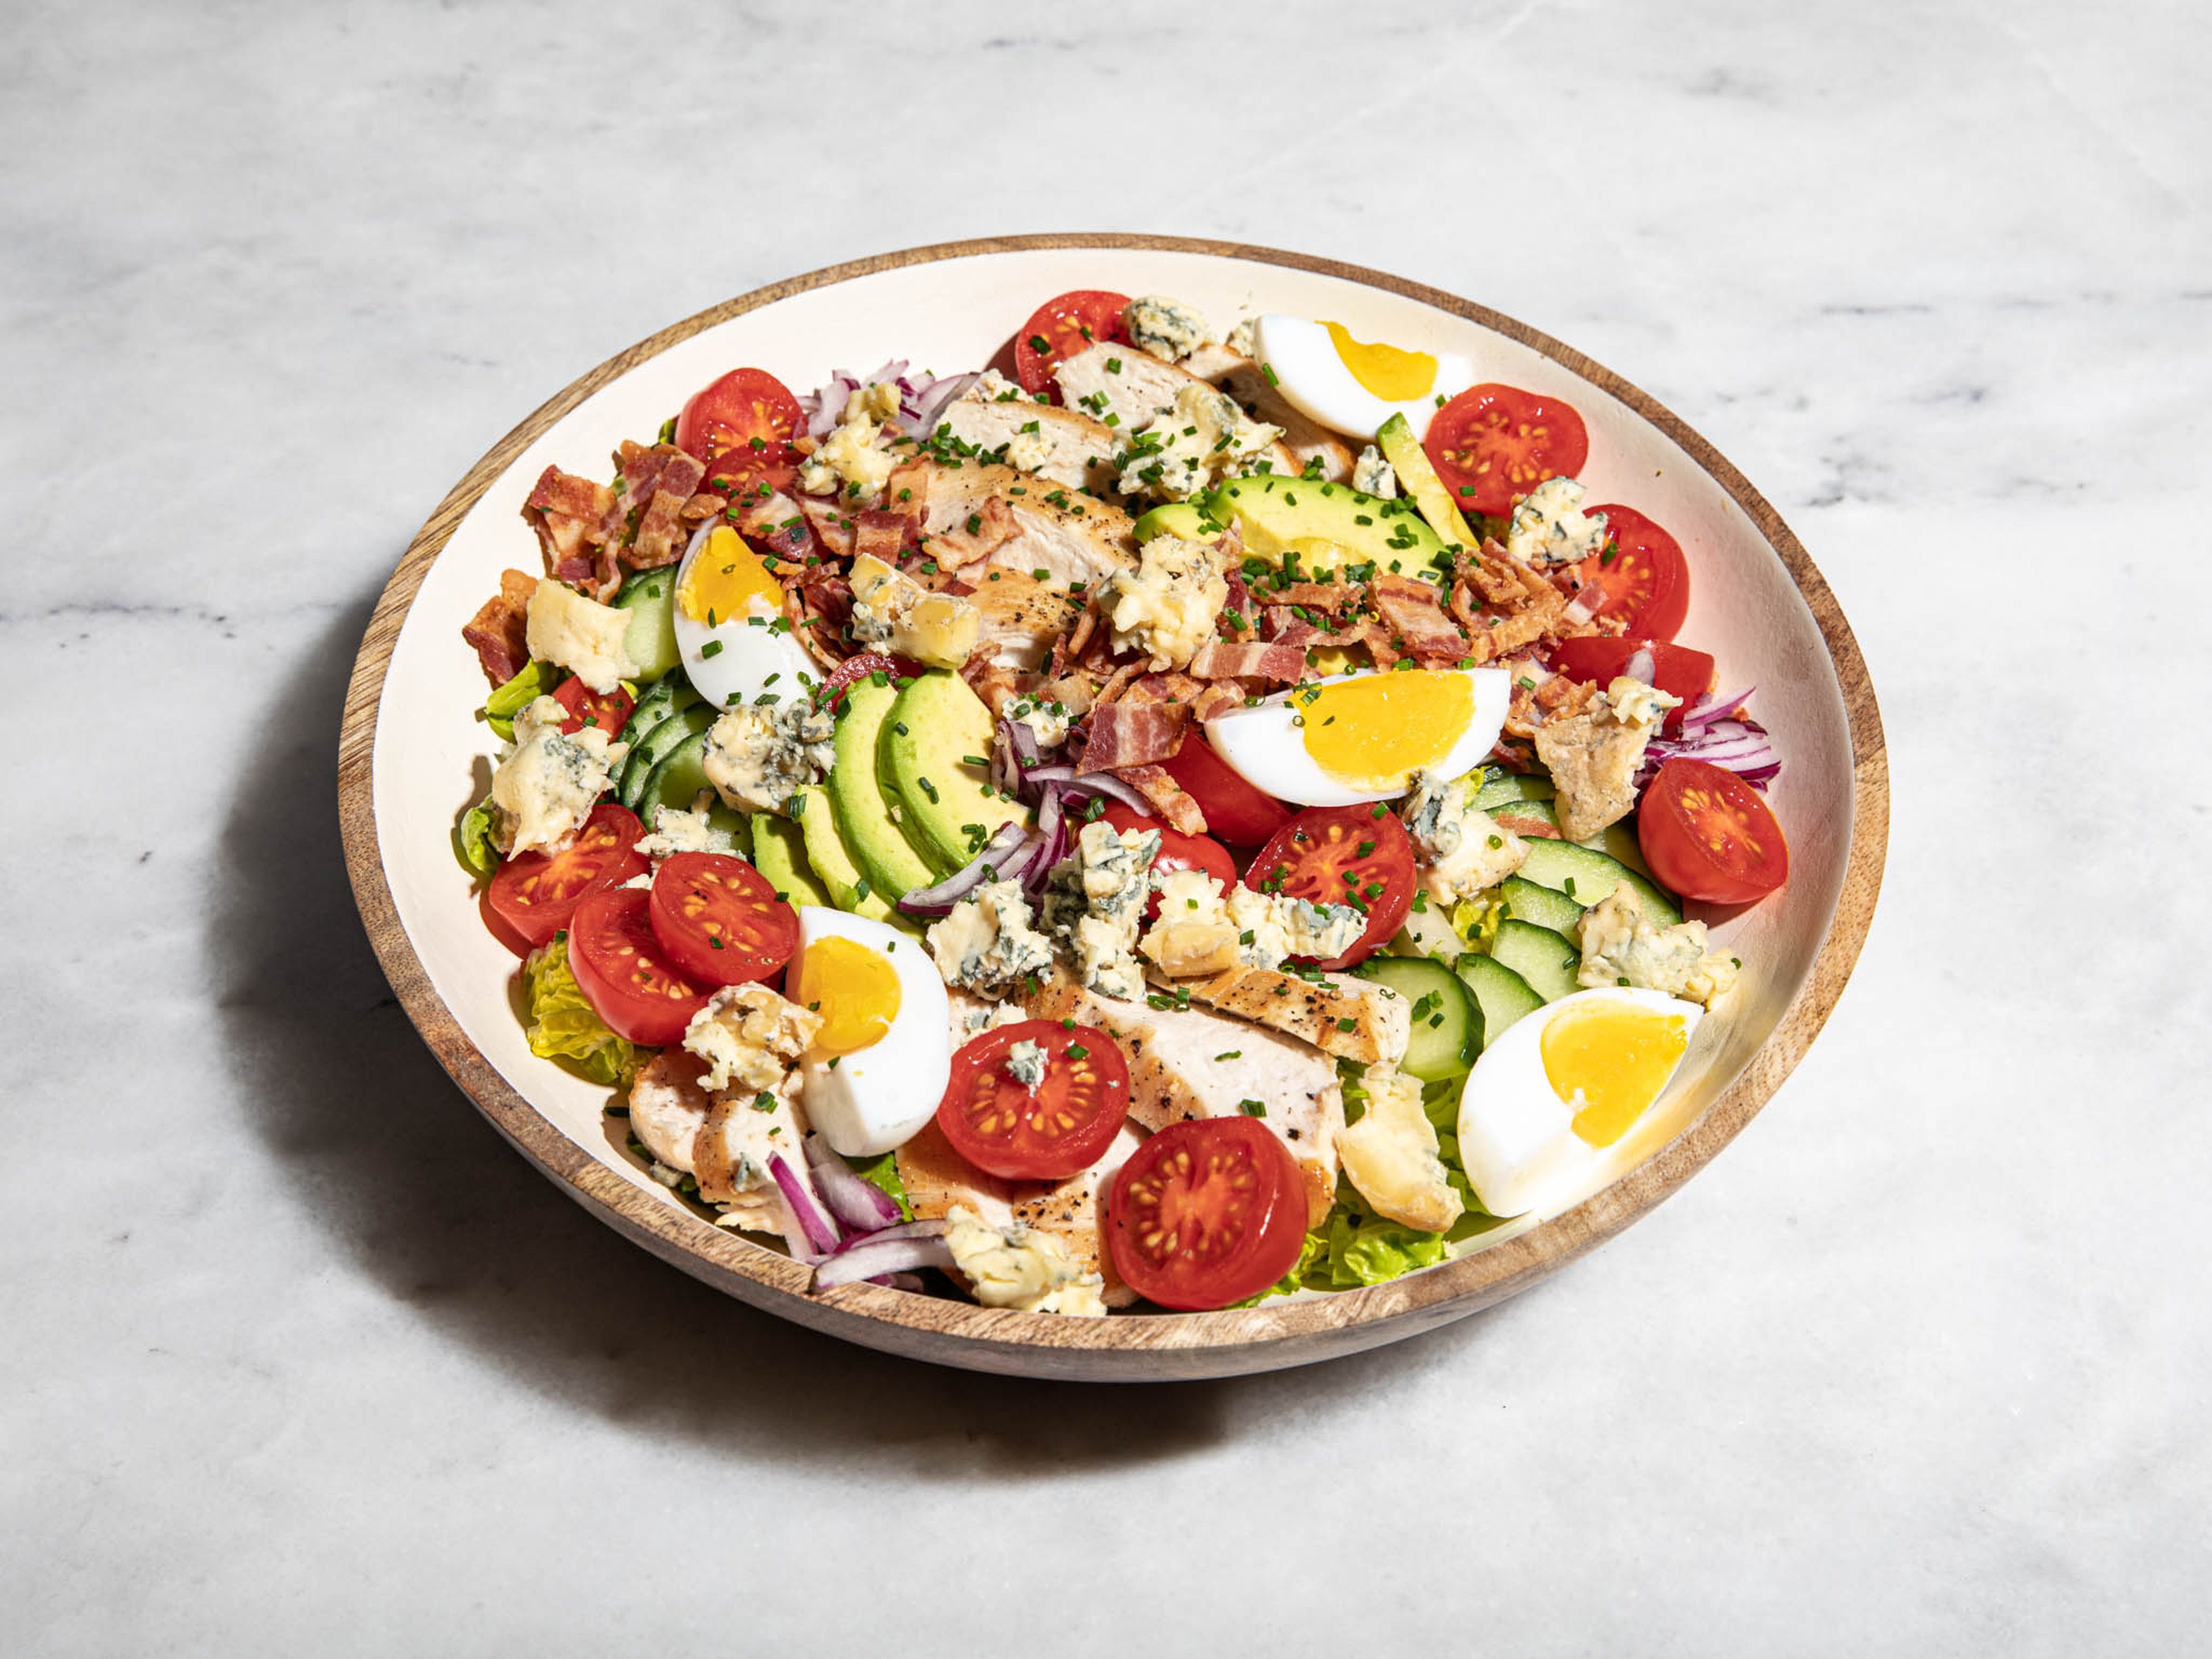 The Cobb Salad: Proof that Salads Can Be Main Dishes, Too